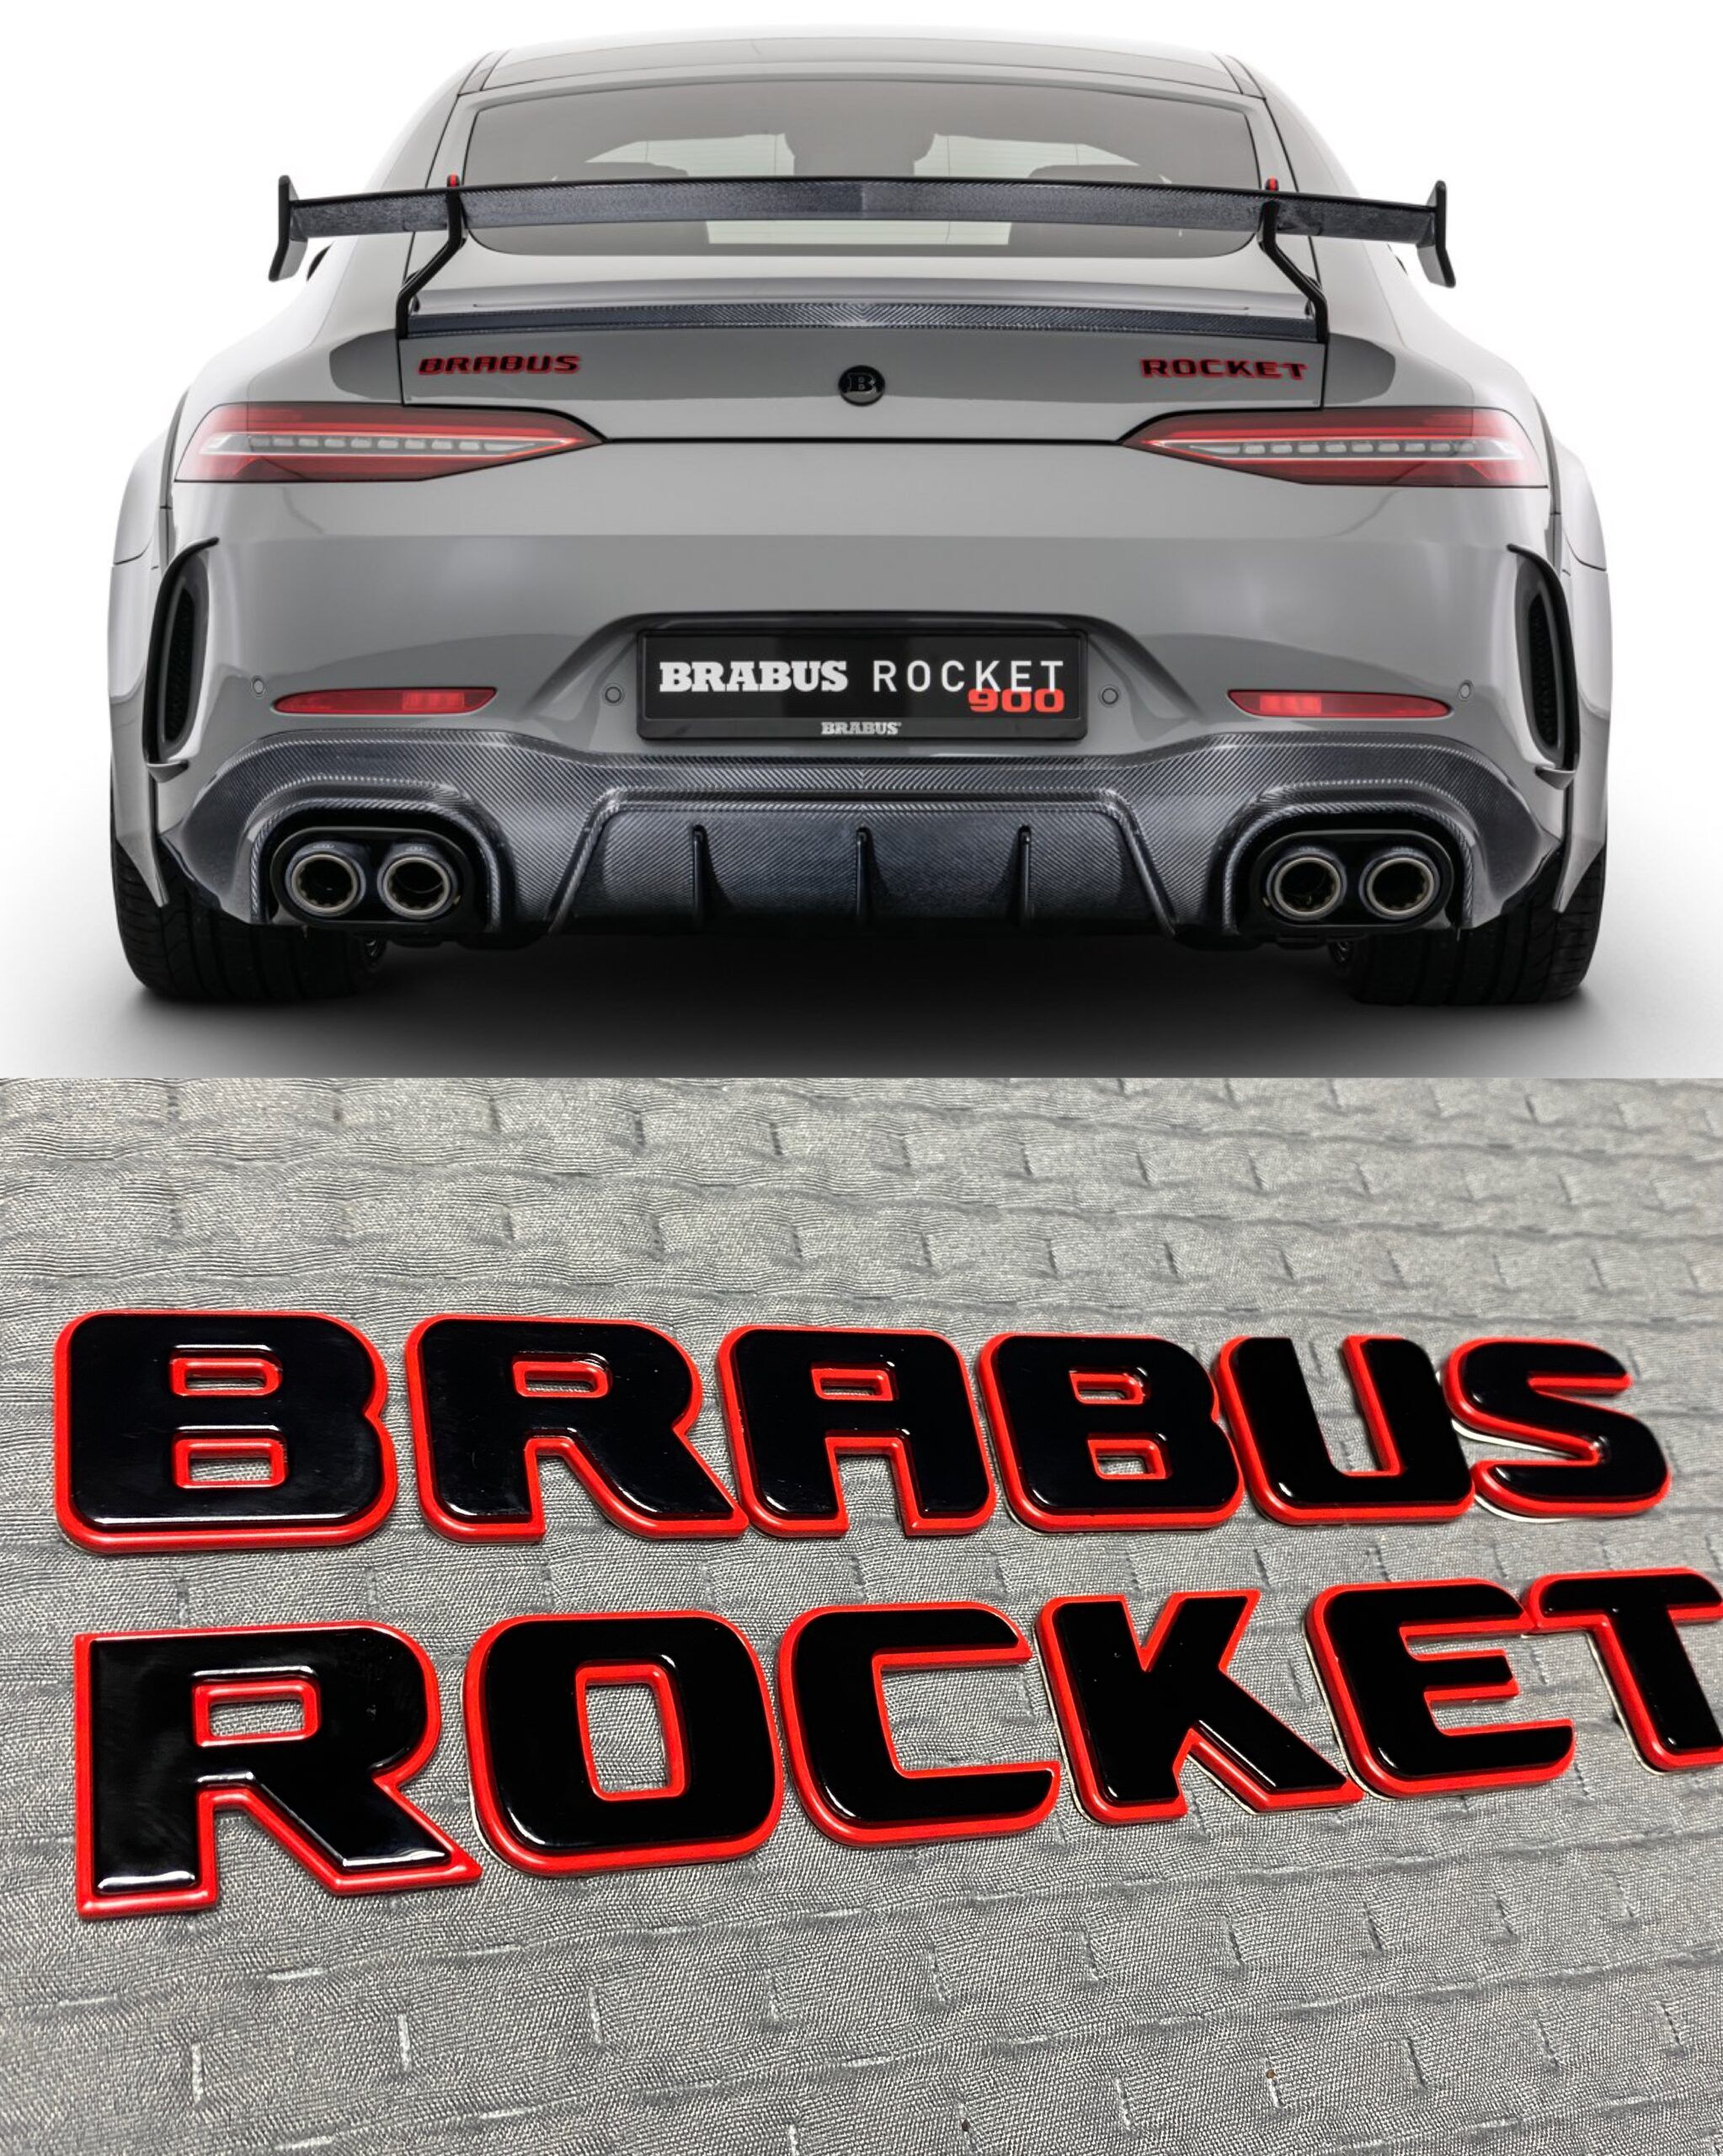 Full complete set Badges of Brabus Rocket Edition 1 of 10 for Mercedes Benz  G class W463a W464 G900 G63